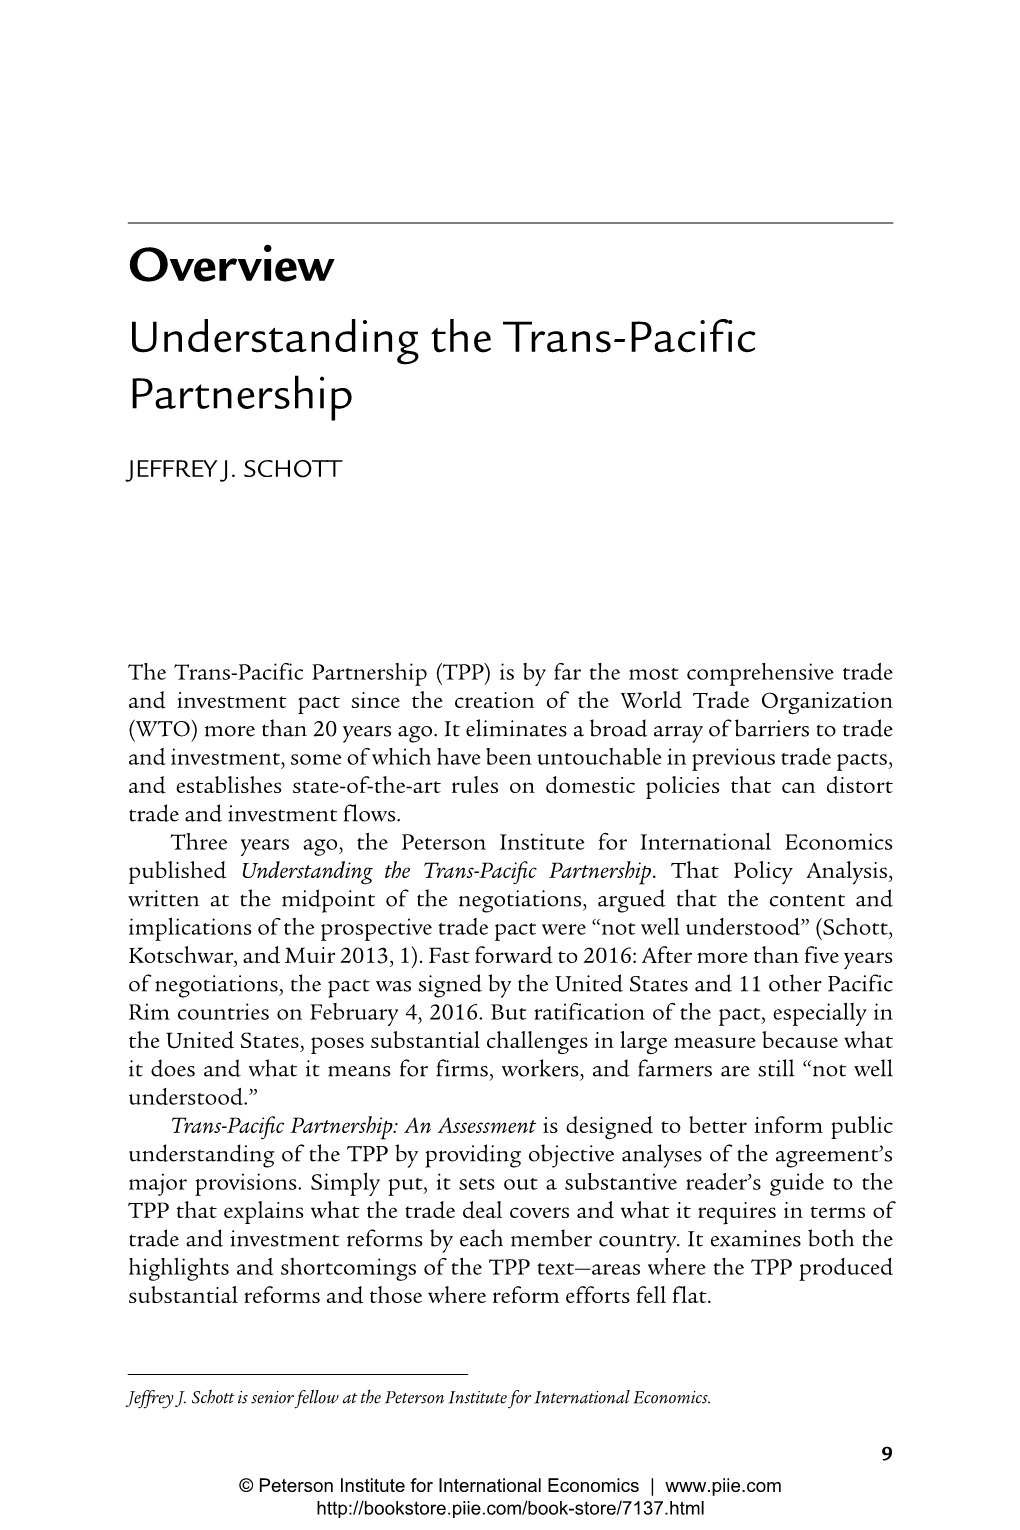 Overview: Understanding the Trans-Pacific Partnership